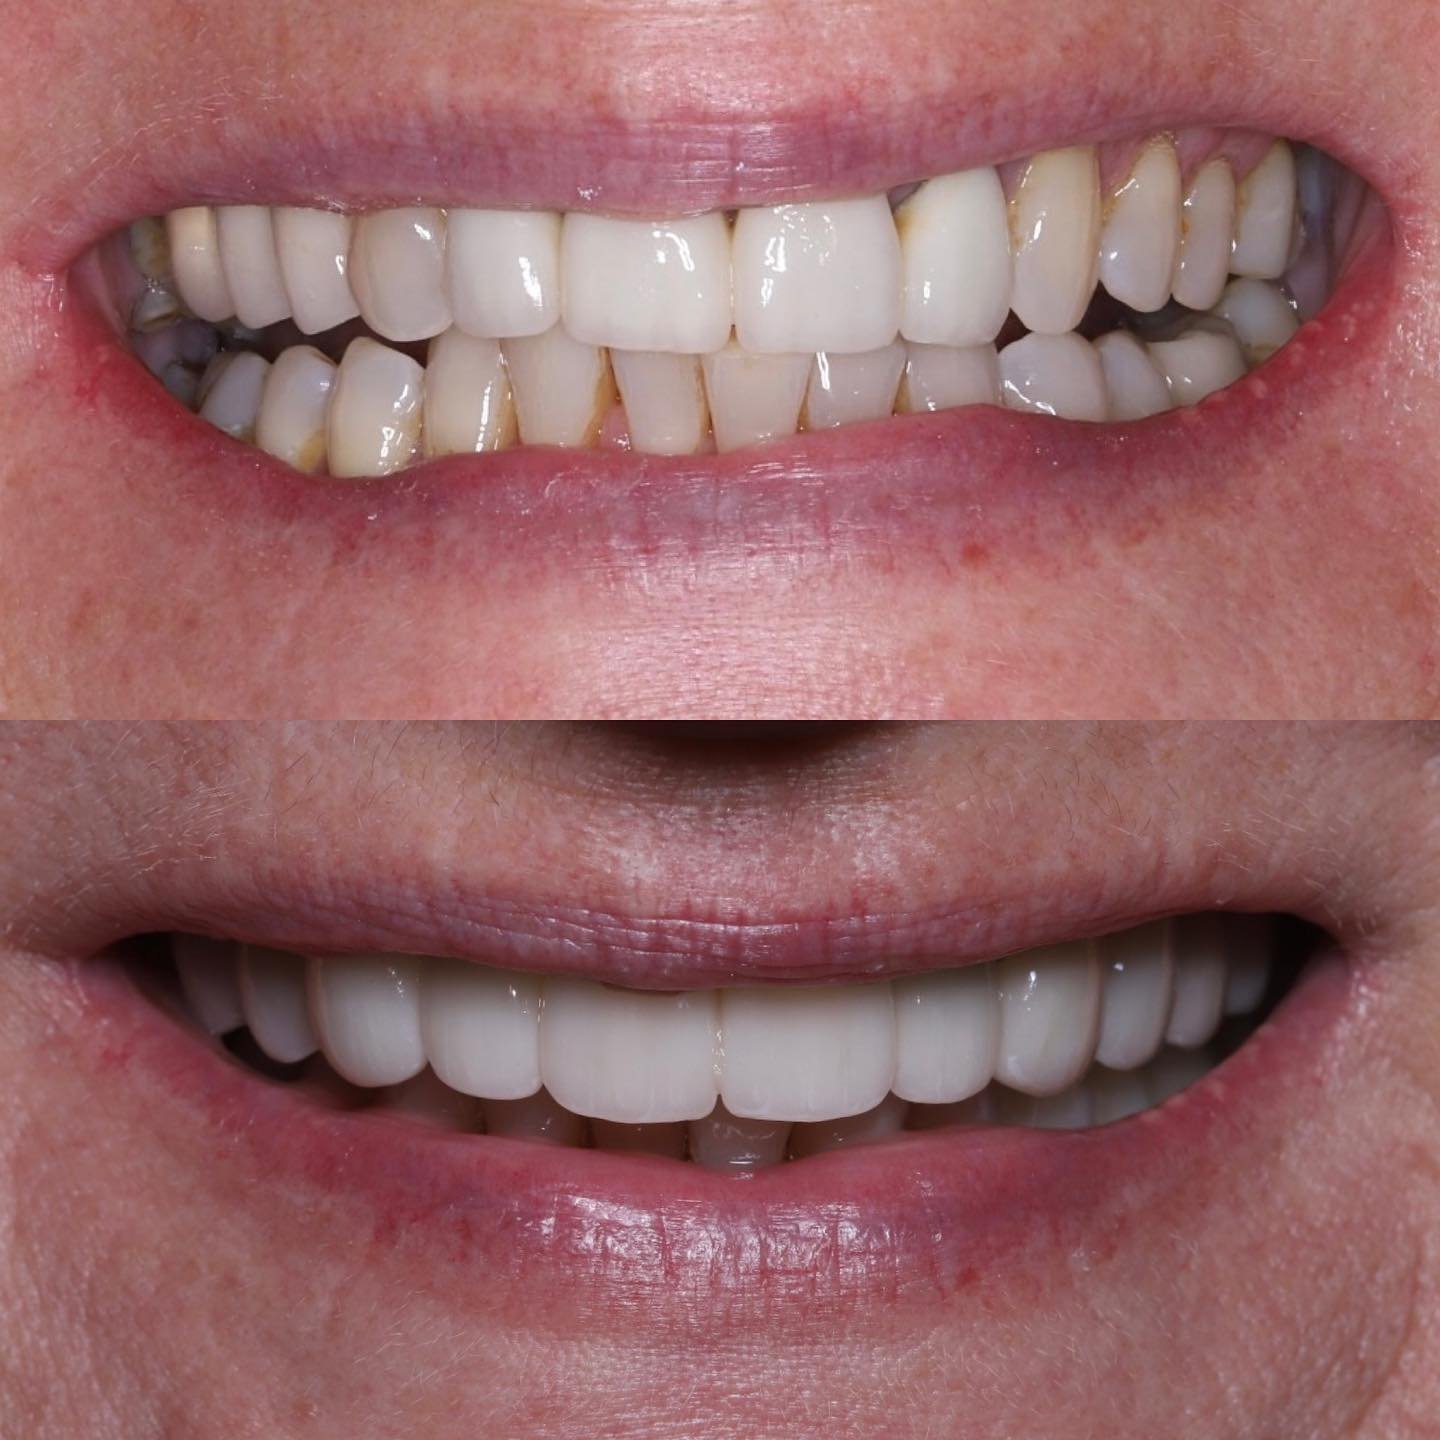 🏗️Full Mouth Rehab🏗️

A big case 2 years in the making. This lovely lady came to see me two years ago looking to improve her smile. Old bulky crowns with little character and the worn misaligned bottom front teeth were the main concerns 🔍 

Compre